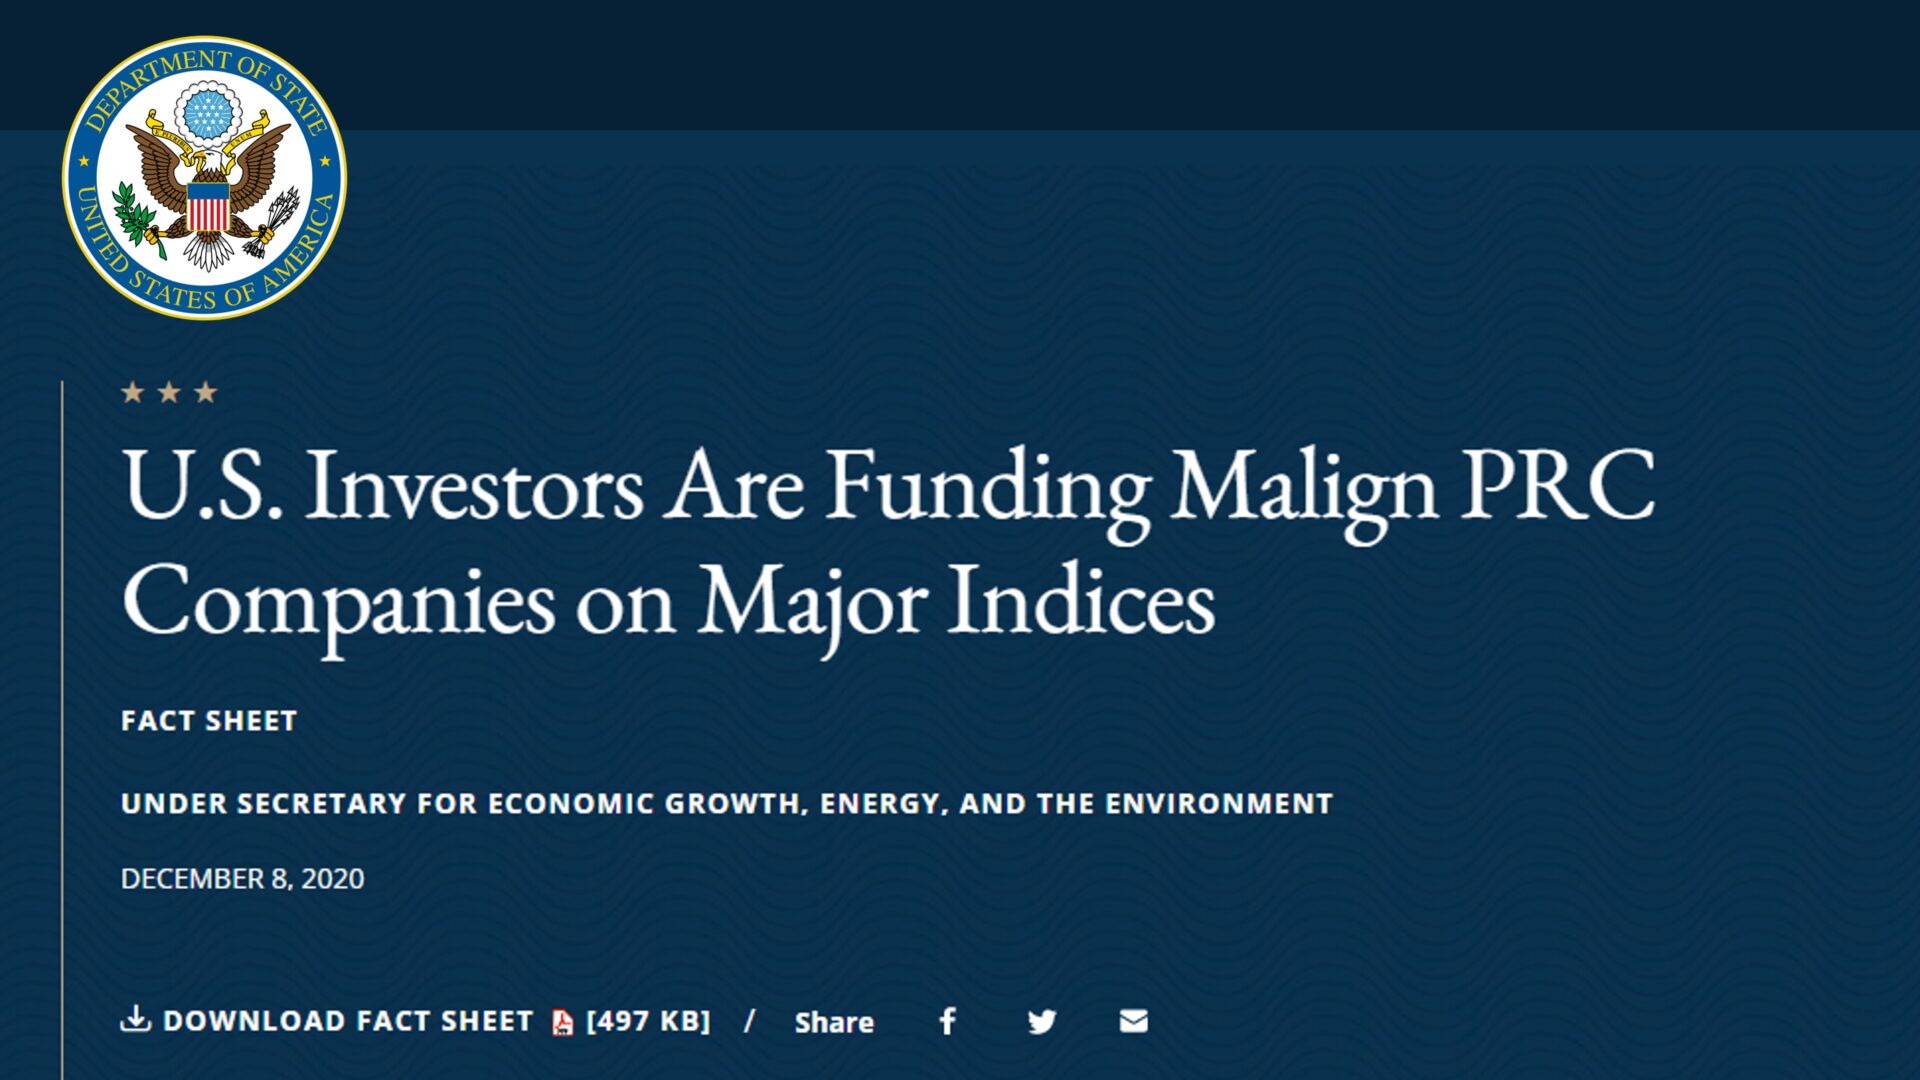 U.S. Investors Are Funding Malign PRC Companies on Major Indices